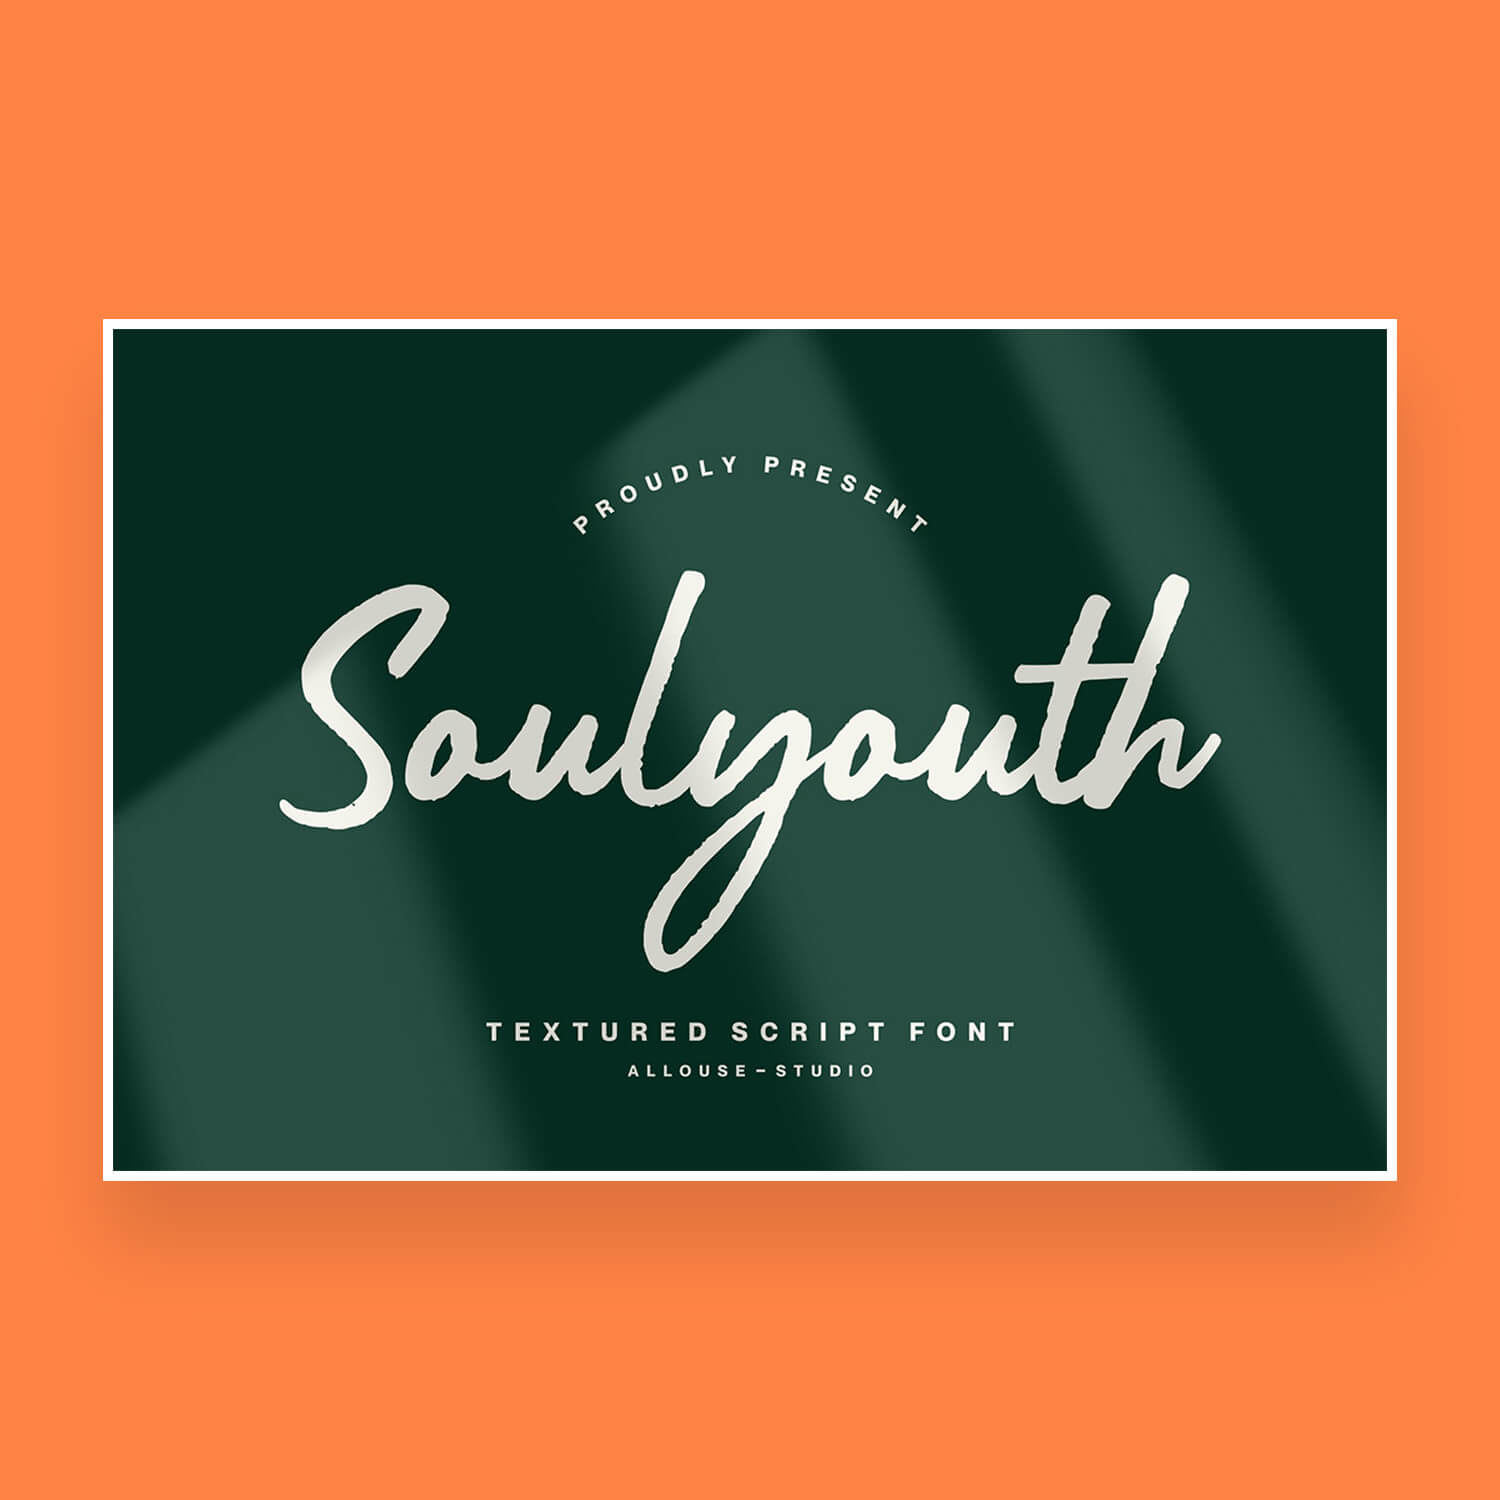 soulyouth stylish textured script font cover image.